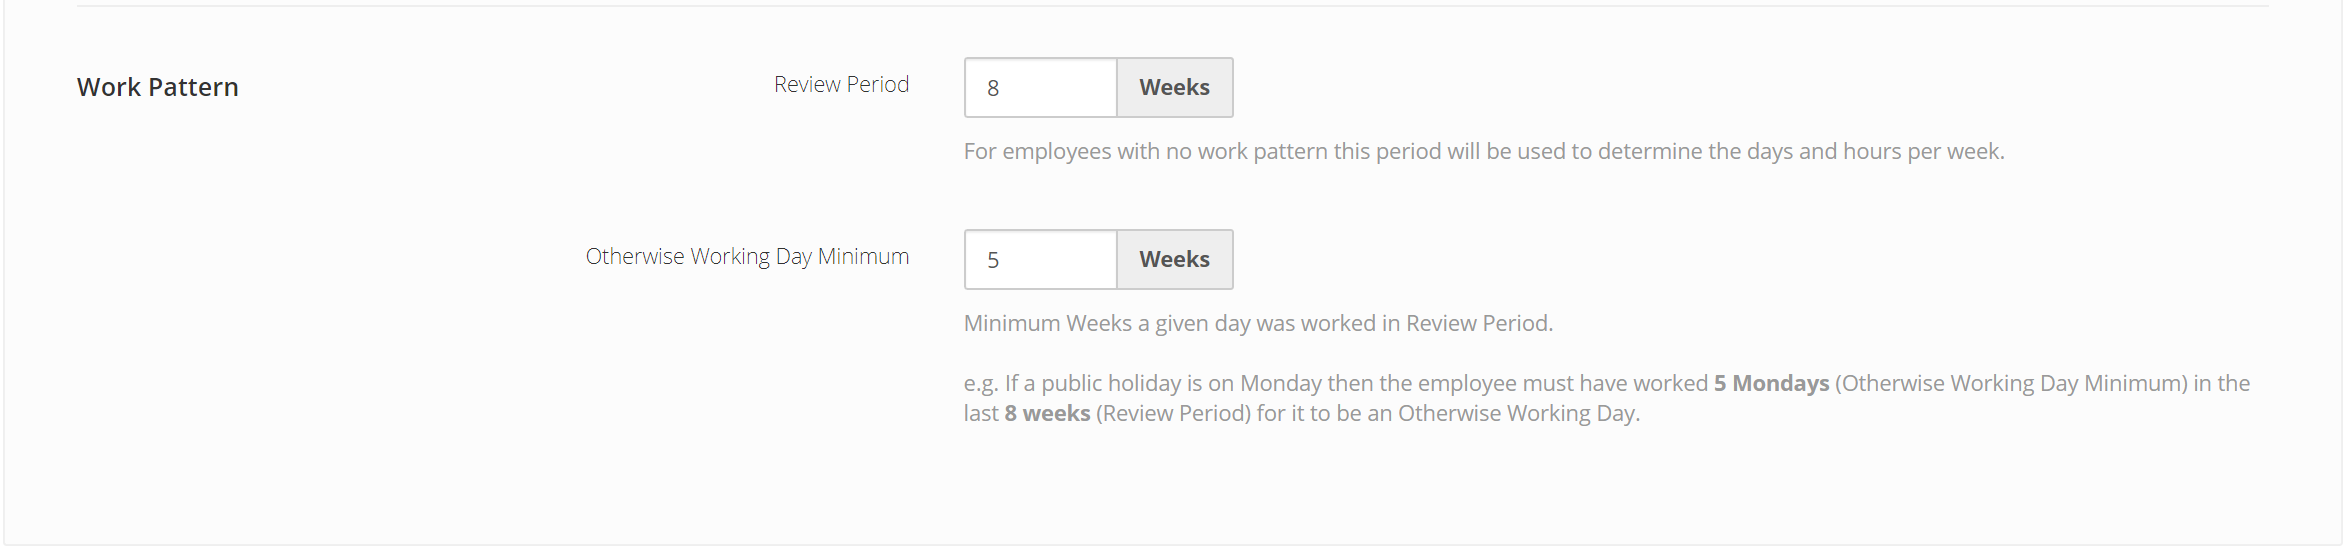 Work_Pattern_Review_Period.png